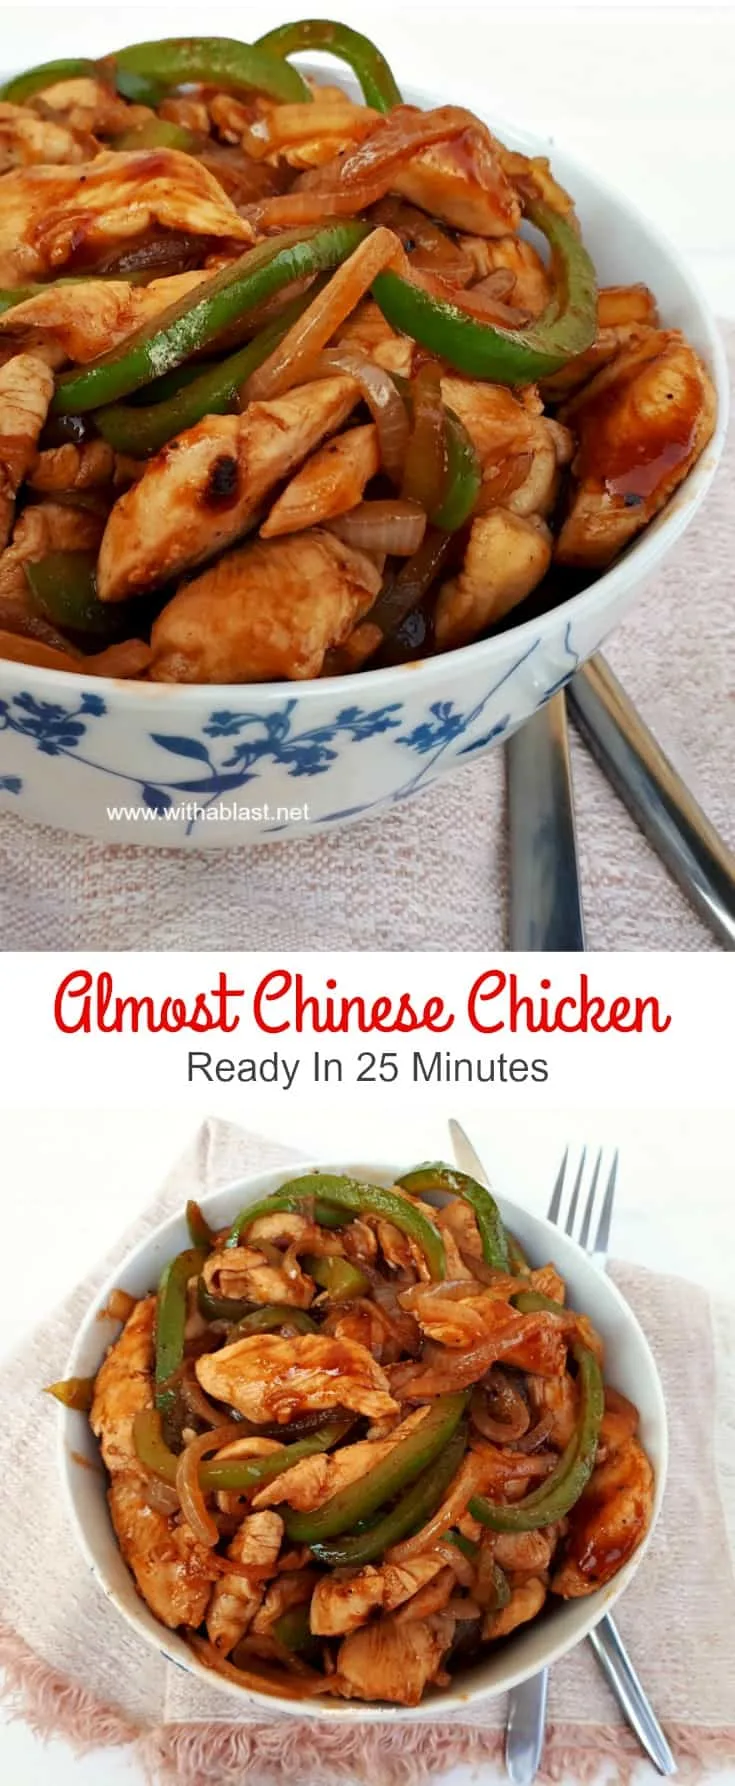 Almost Chinese Chicken takes only 25 Minutes - Prep to Serve ! Quick, delicious, sweet and sour chicken dinner which can be served over rice or noodles  #ChickenRecipes #QuickChickenRecipes #ChineseChickenRecipes #EasyDinnerRecipes